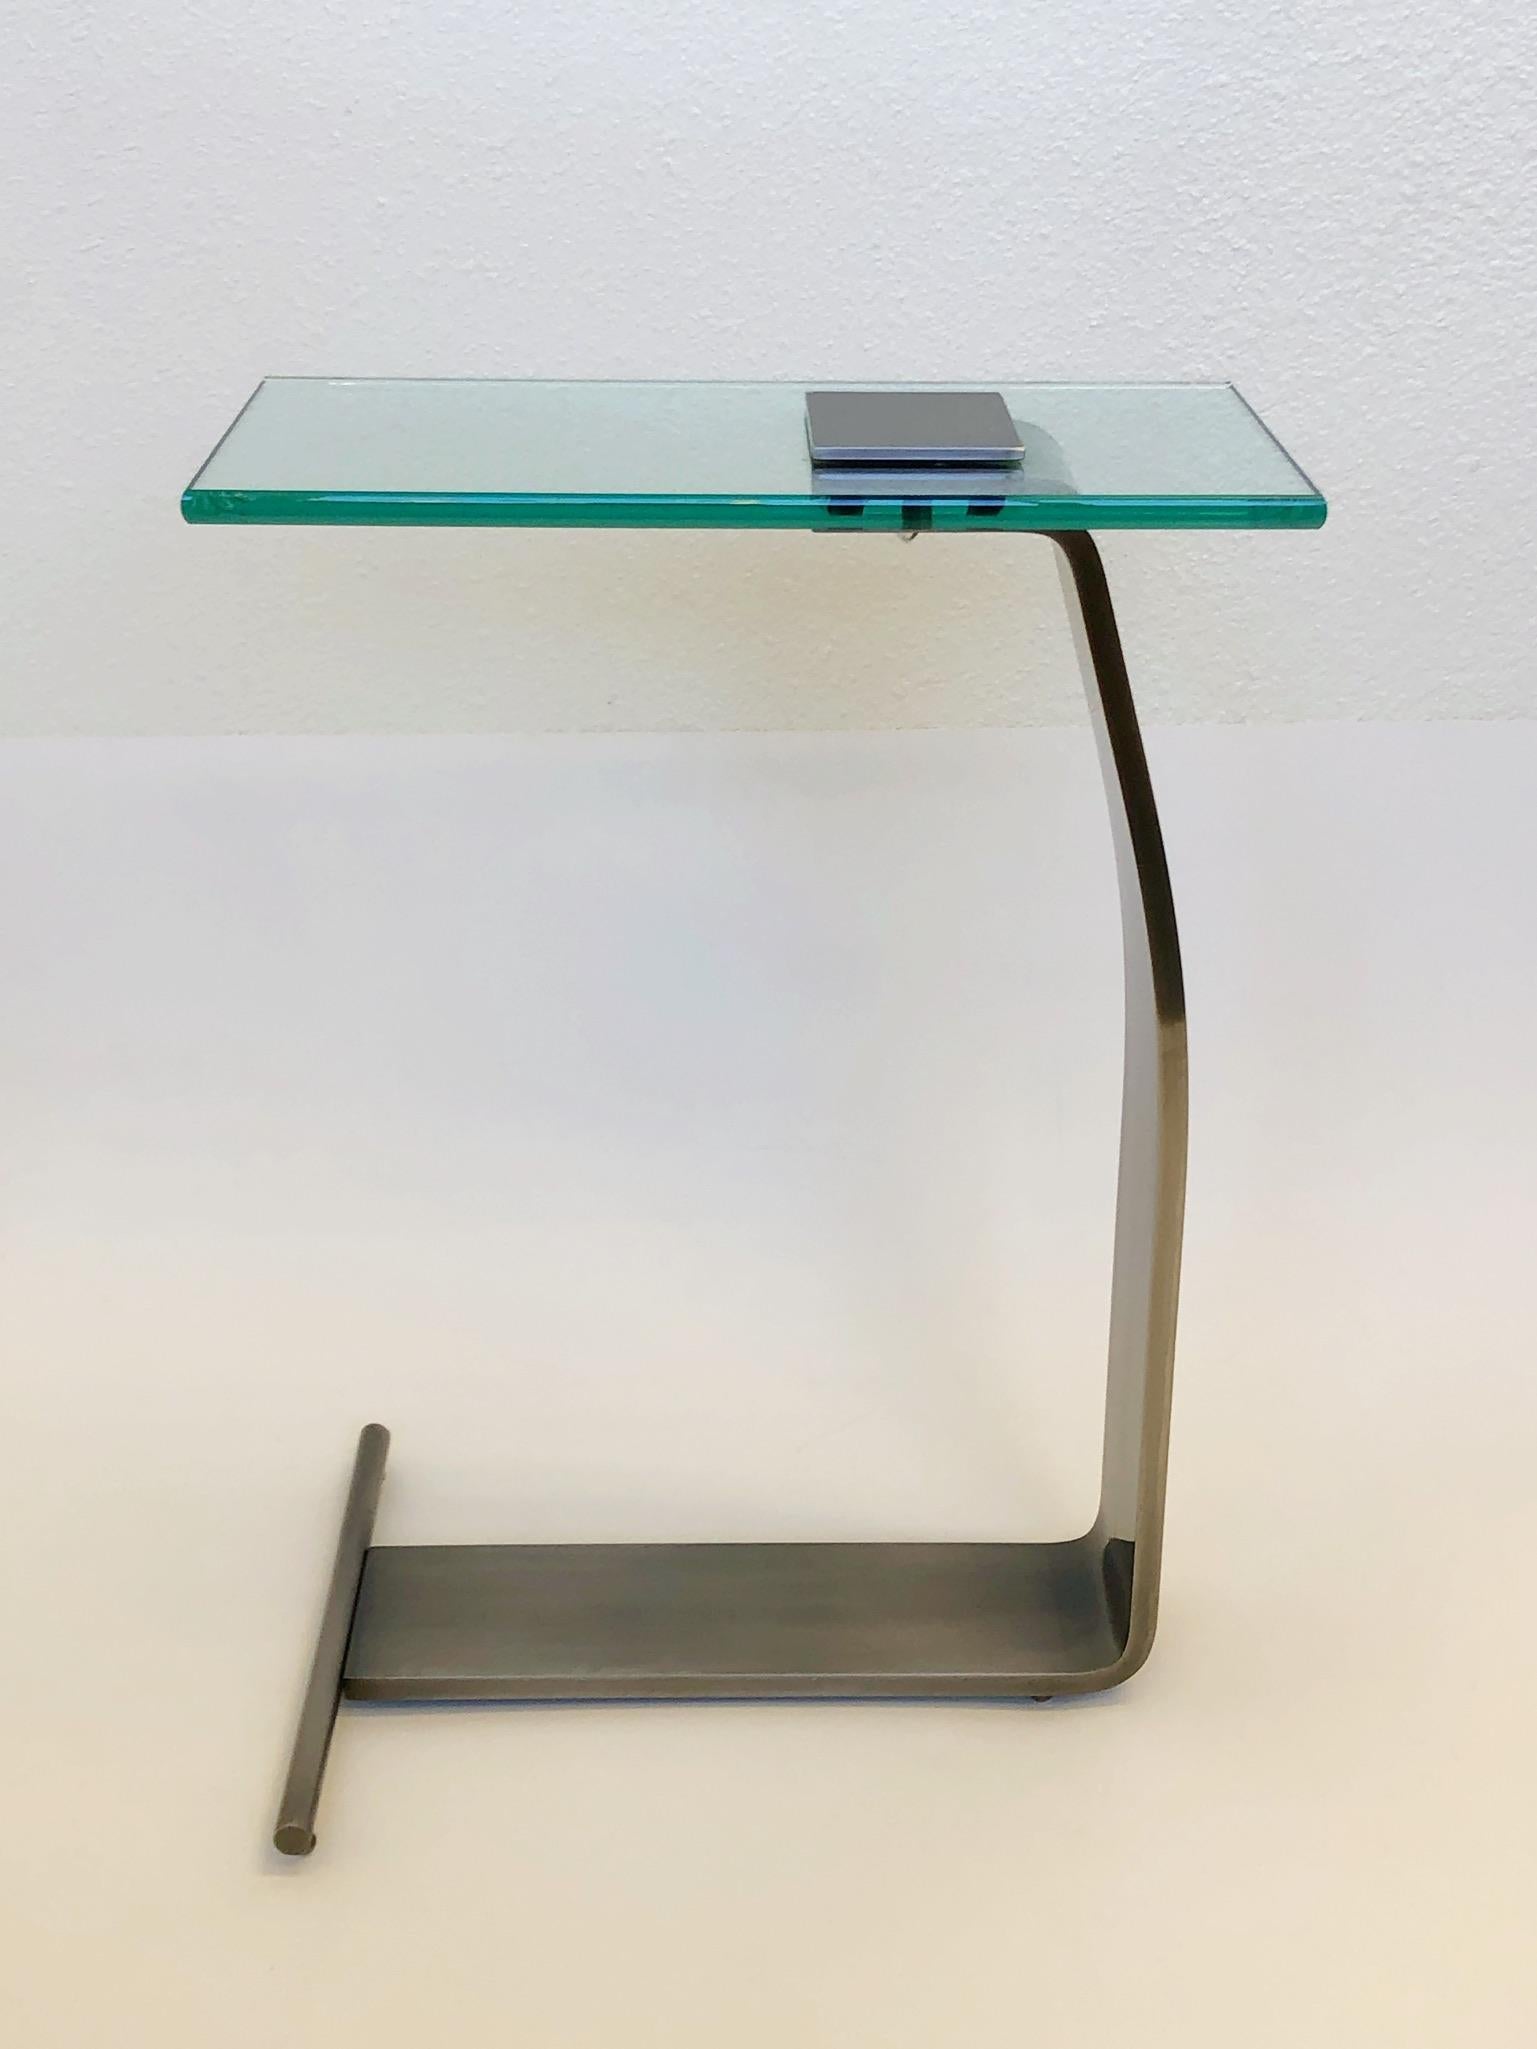 A stainless steal and glass top occasional table design by Kaizo Oto for Design Institute of America in the 1980s
Dimensions: 22” high, 16”wide, 8” deep.